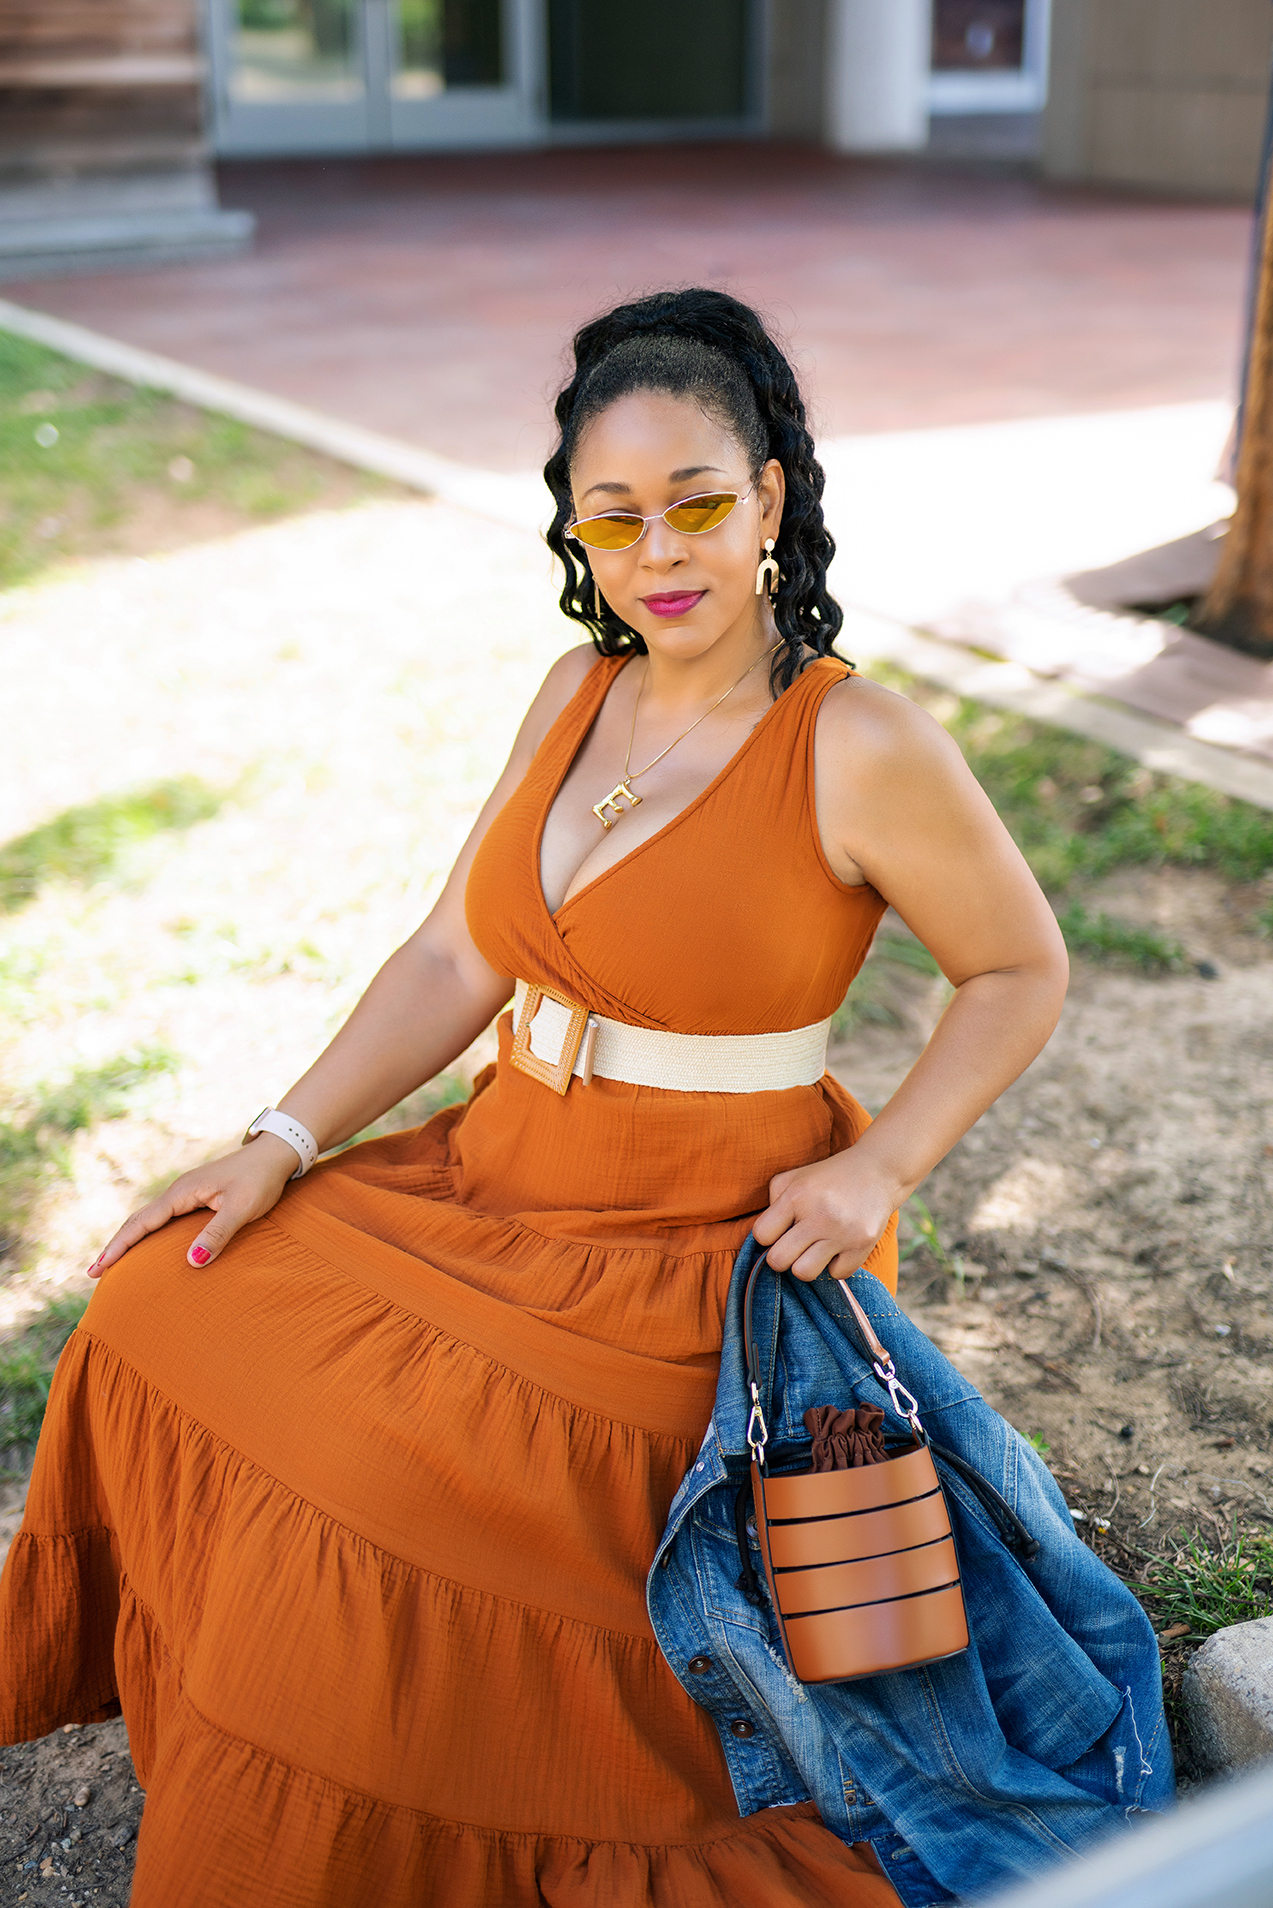 Pumpkin Spice and Everything Nice: What I'm Wearing: Women's Cateye Sunglasses - Wild Fable™ Gold, Women's Sleeveless Tiered Dress - Universal Thread™, Eva Mendes Collection Cutout Bucket Bag, Essex Lane Finnet Wedge Sandal